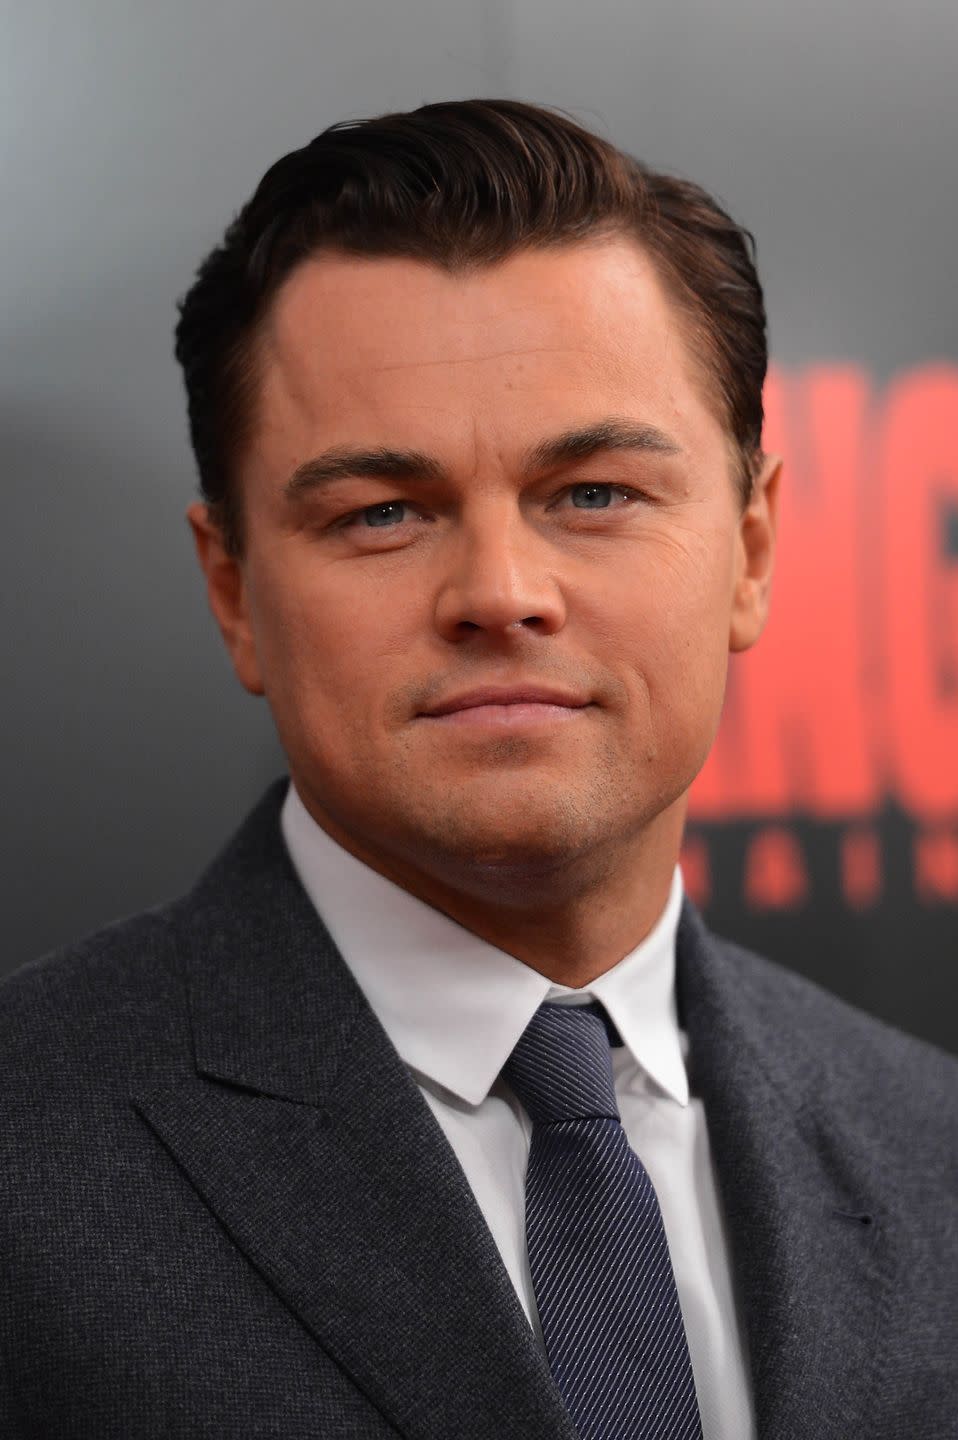 <p>While the amount of facial hair DiCaprio wears ebbs and flows, he's rarely rocked a clean shaven look since his younger days.</p>